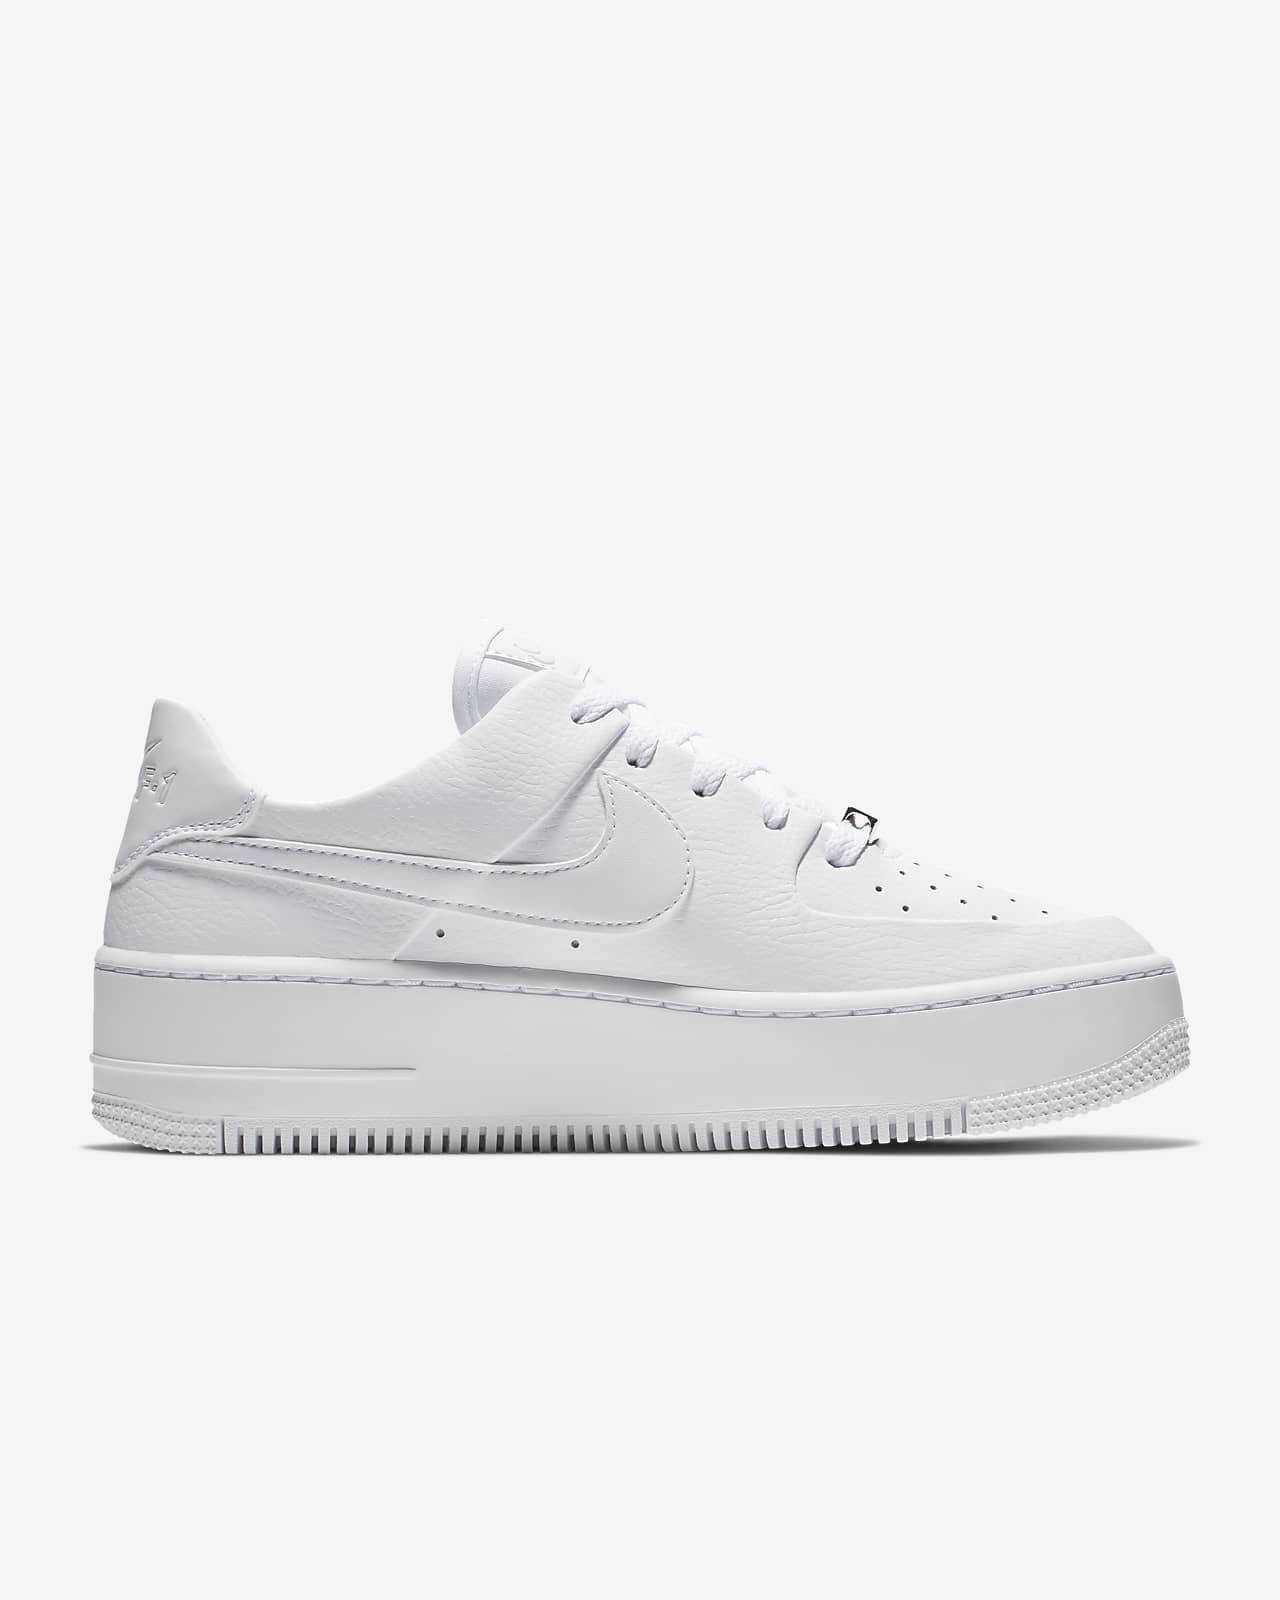 womens nike air force 1 white size 8.5